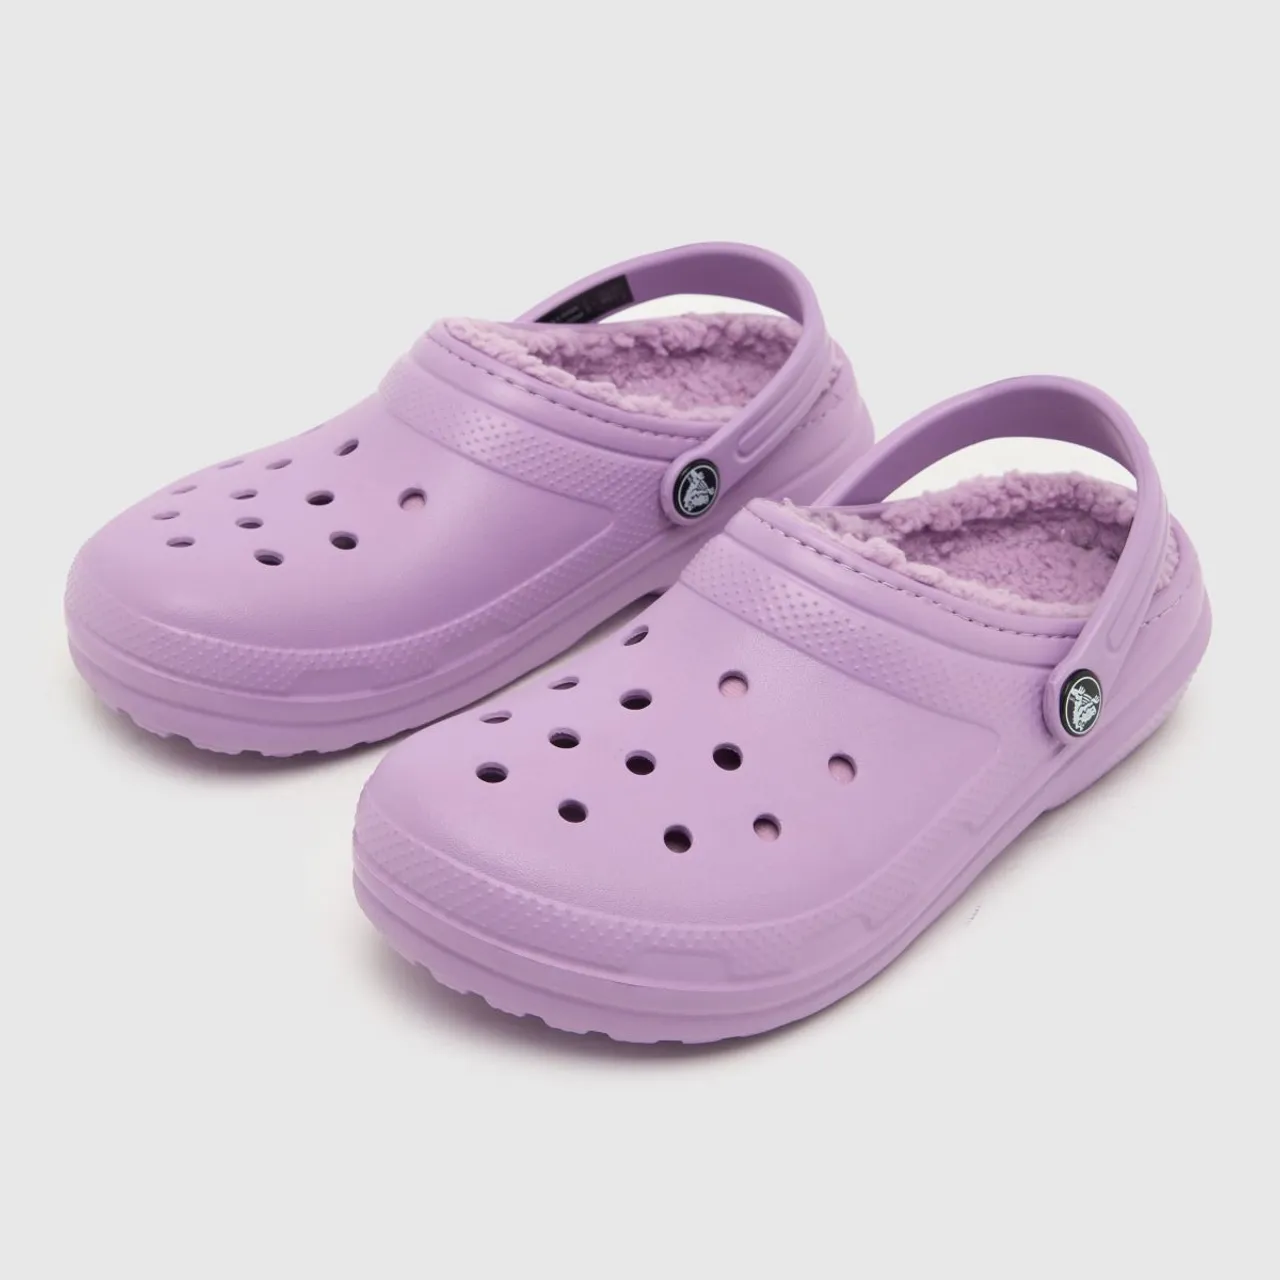 Crocs Lilac Classic Lined Clog Girls Youth Sandals